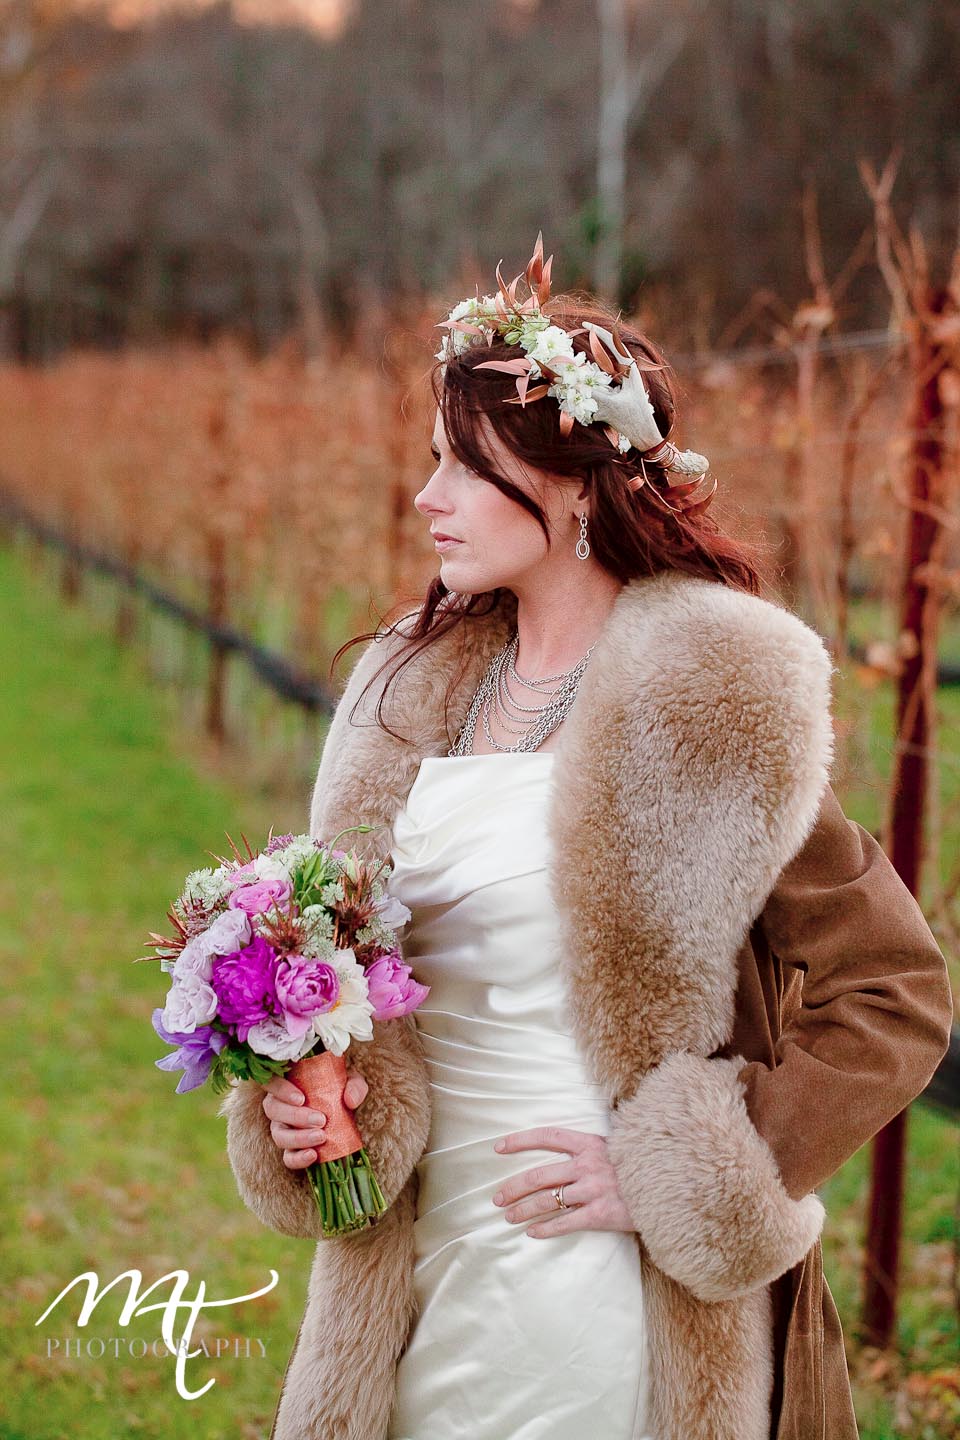 A mid-winter's night dream styled wedding photography shoot